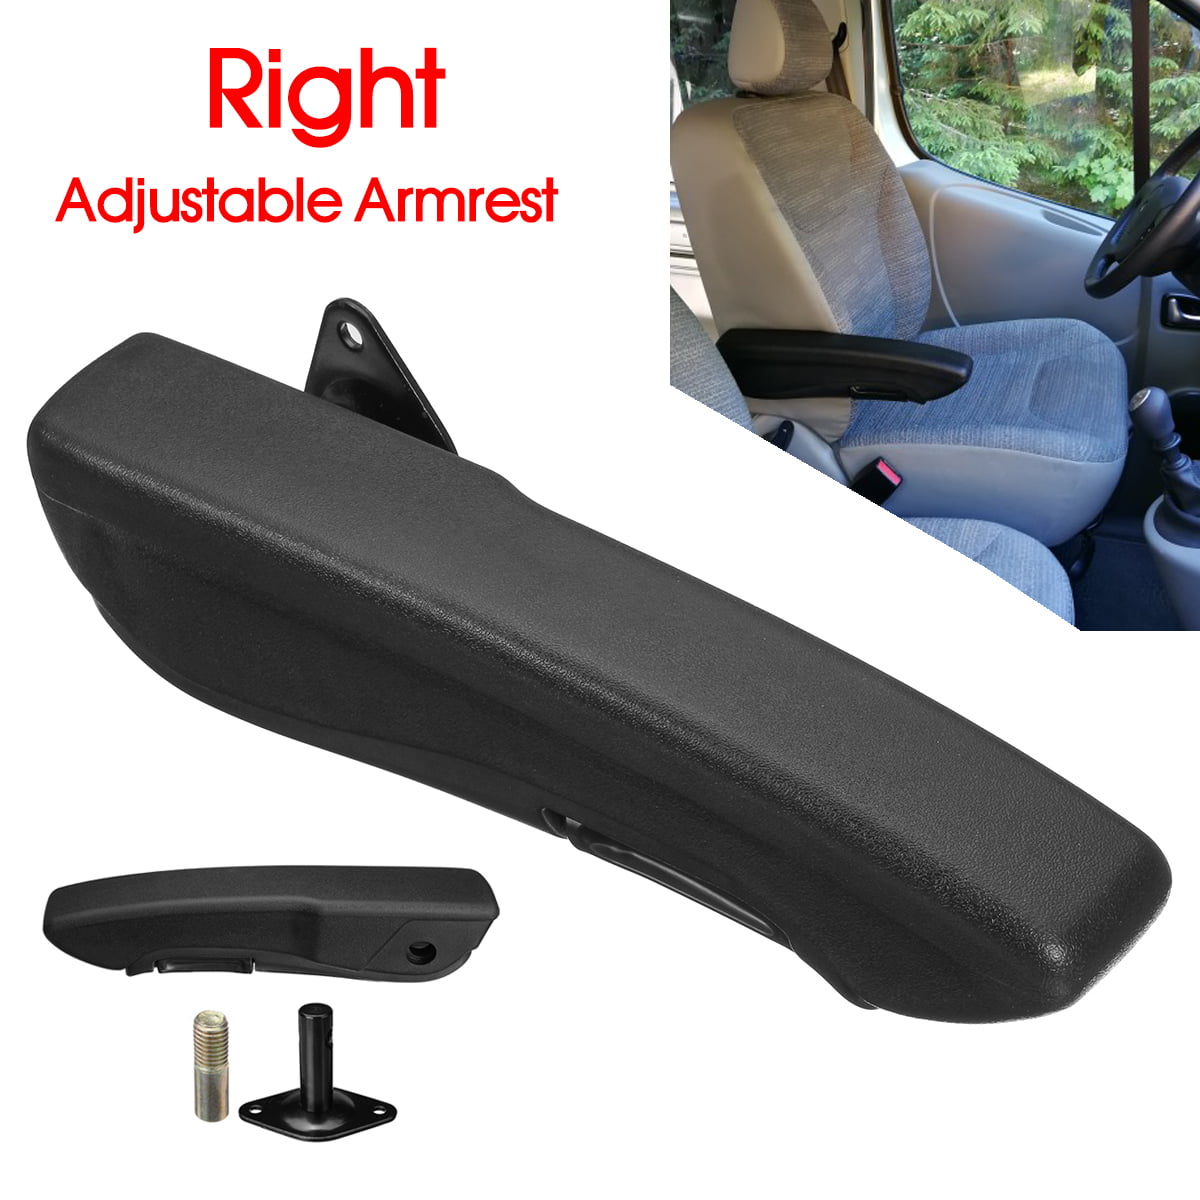 CAR front seat protector cover HEAVY DUTY HEAVY WEIGHT delux vented for ARM REST 